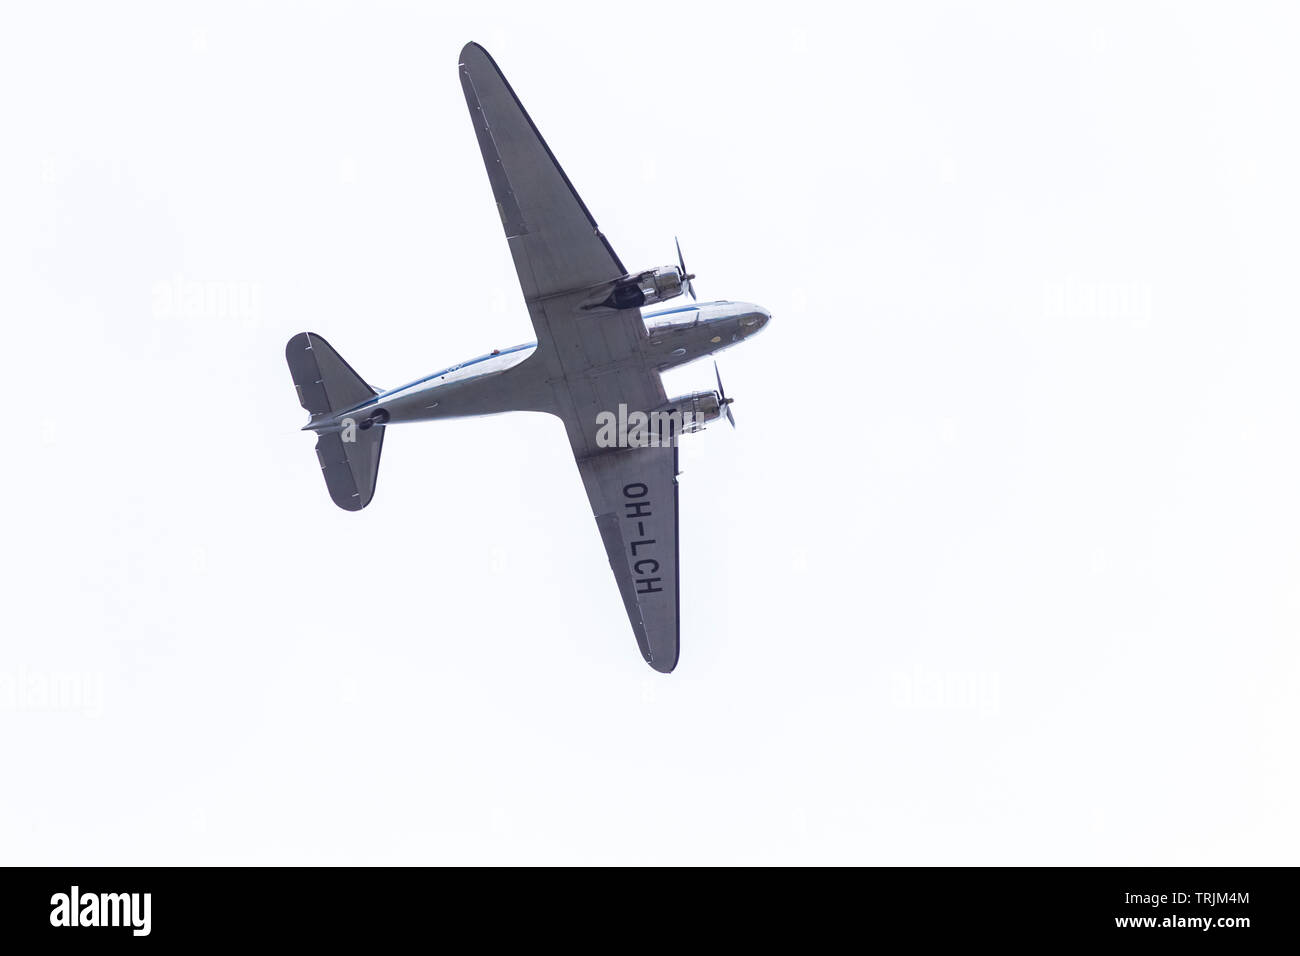 Single Dakota Heading to Normandy Overhead Southend Airport as Part of 75 year D-Day Anniversary Stock Photo